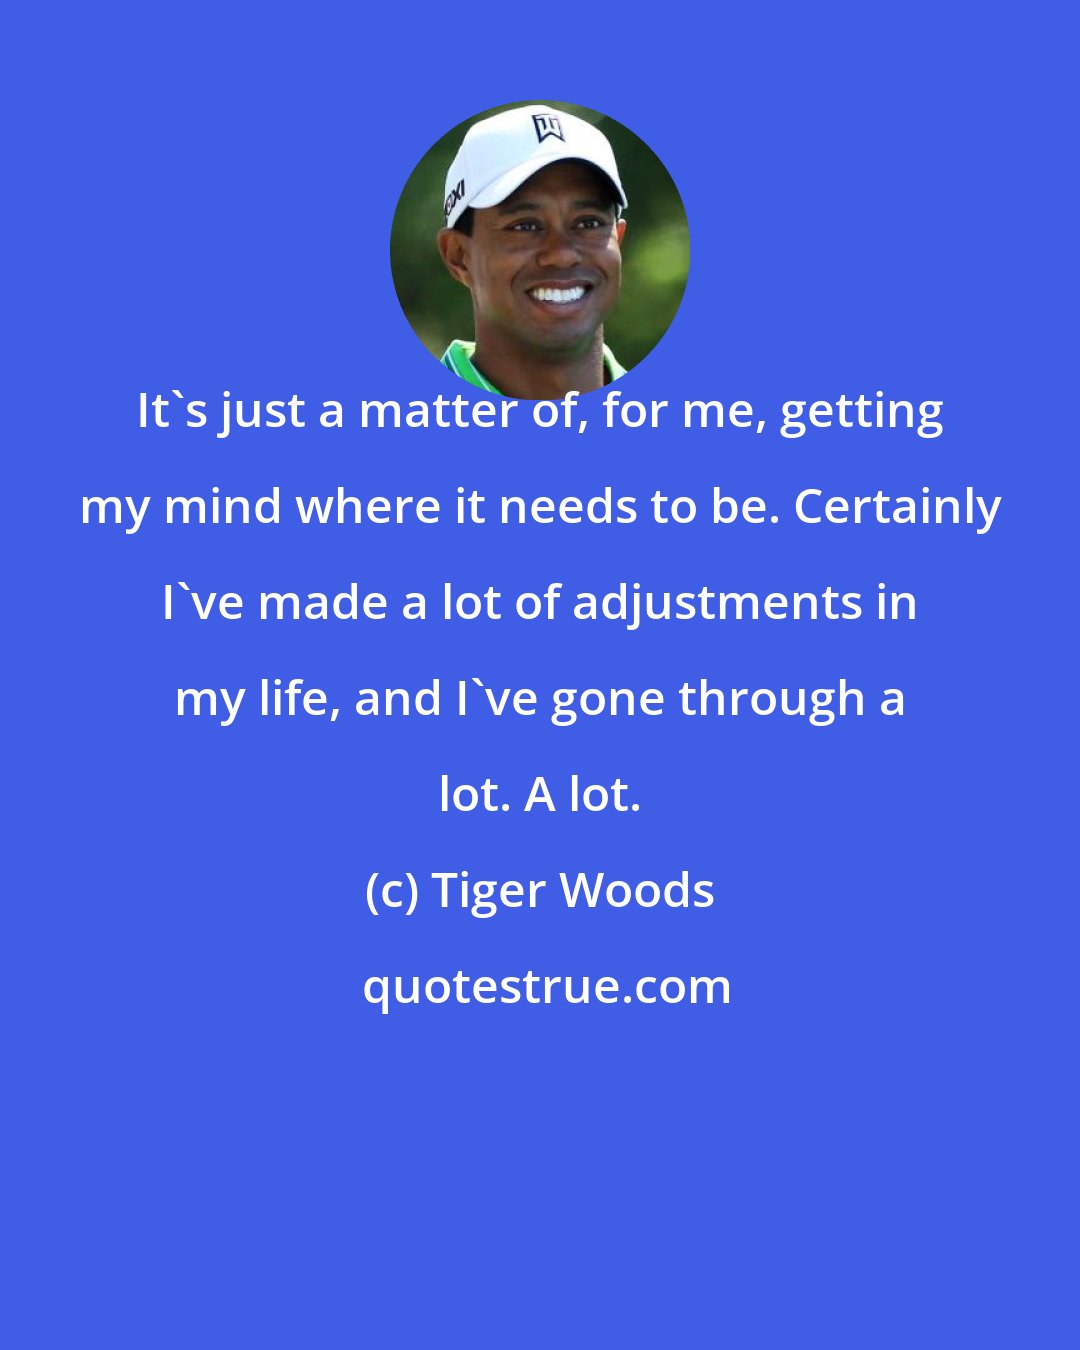 Tiger Woods: It's just a matter of, for me, getting my mind where it needs to be. Certainly I've made a lot of adjustments in my life, and I've gone through a lot. A lot.